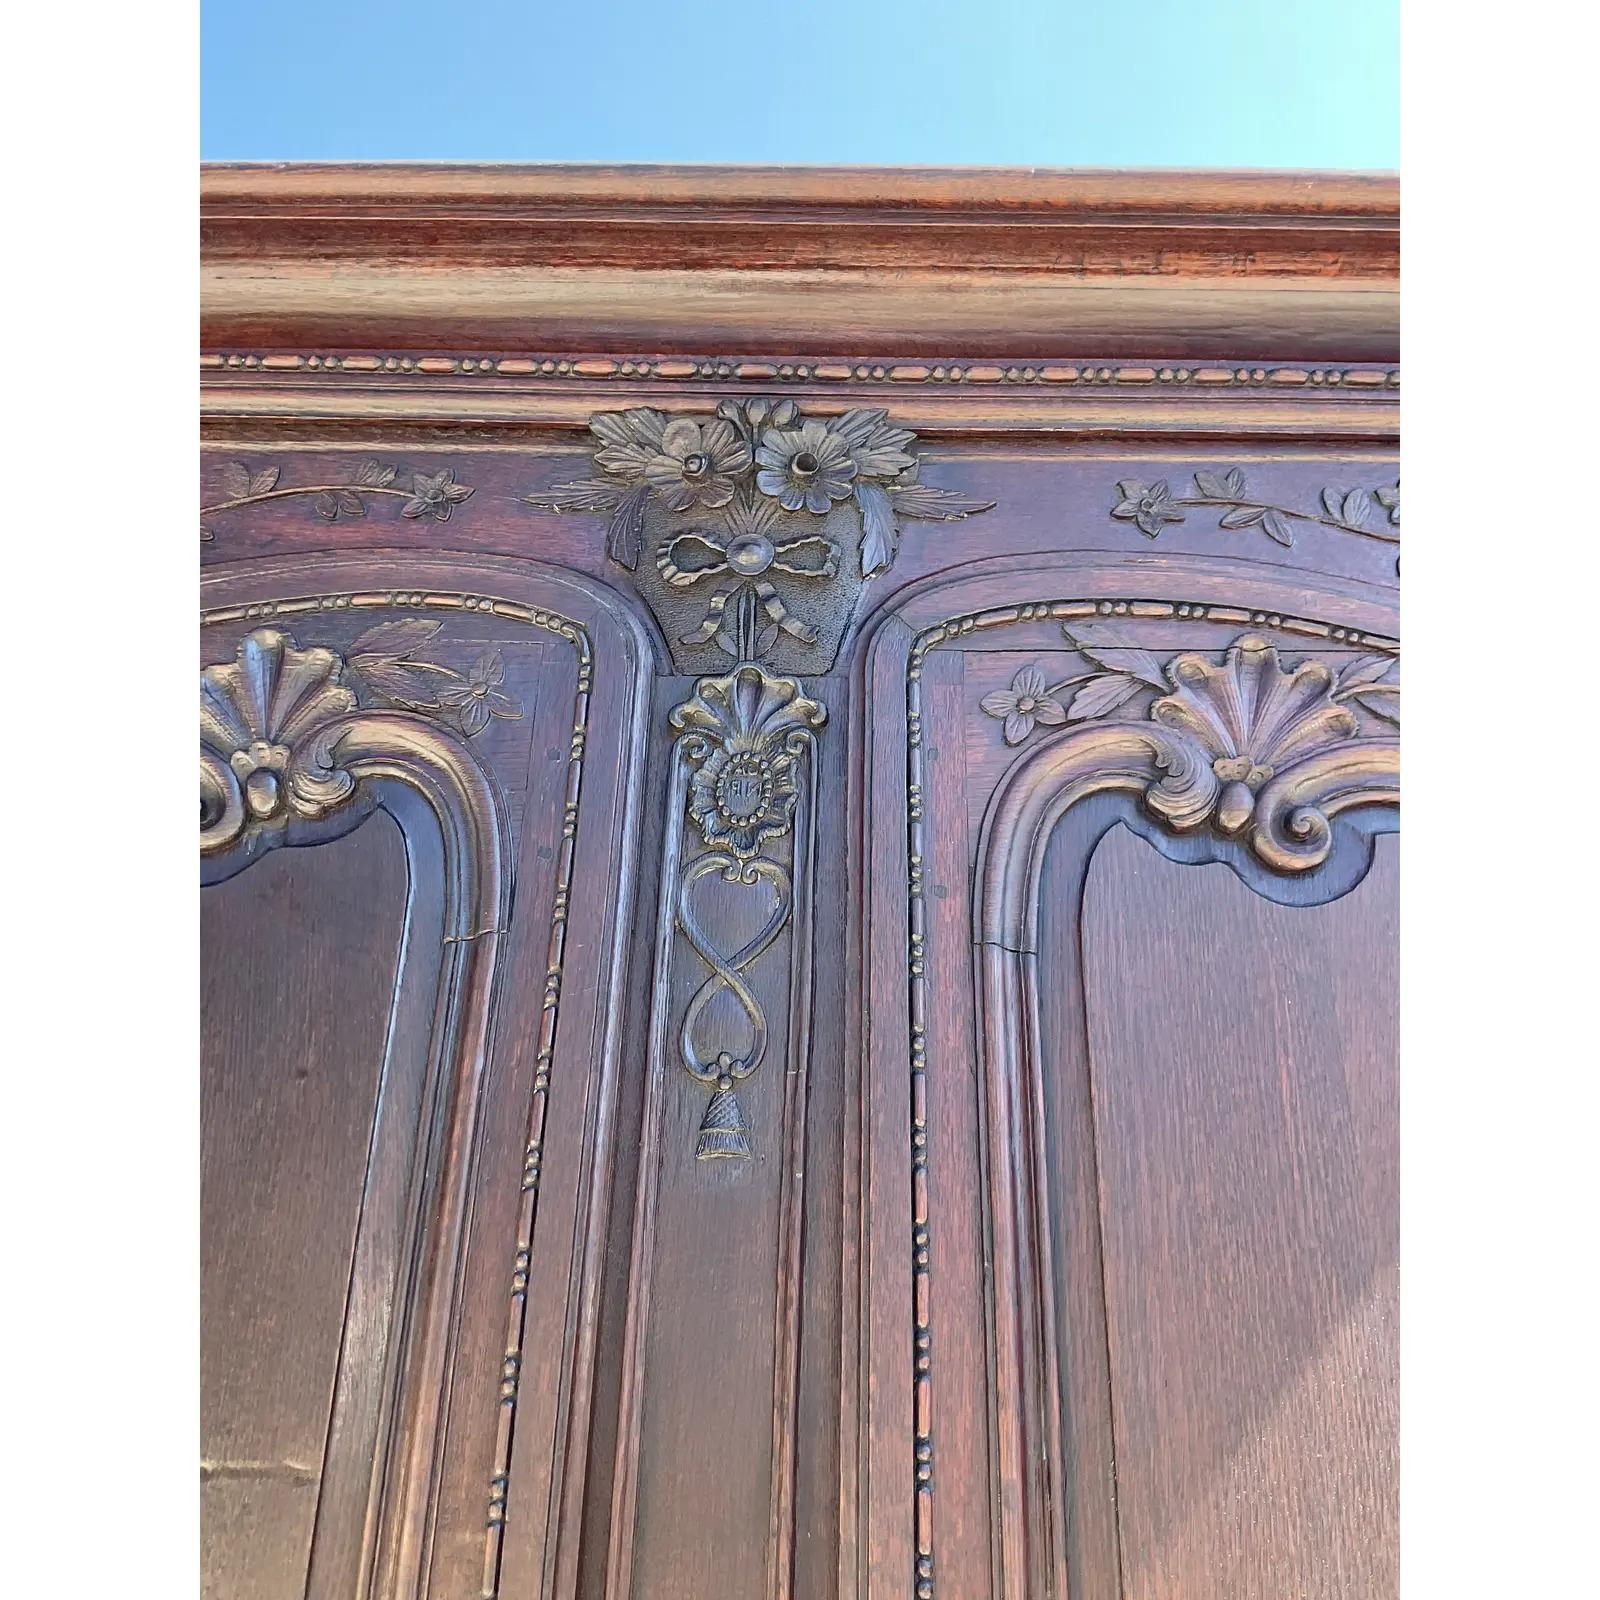 A truly spectacular vintage French hand carved armoire. A monumental rustic masterpiece with original hardware and hand carved detail. Lots of great interior storage. Acquired from a Palm Beach estate.